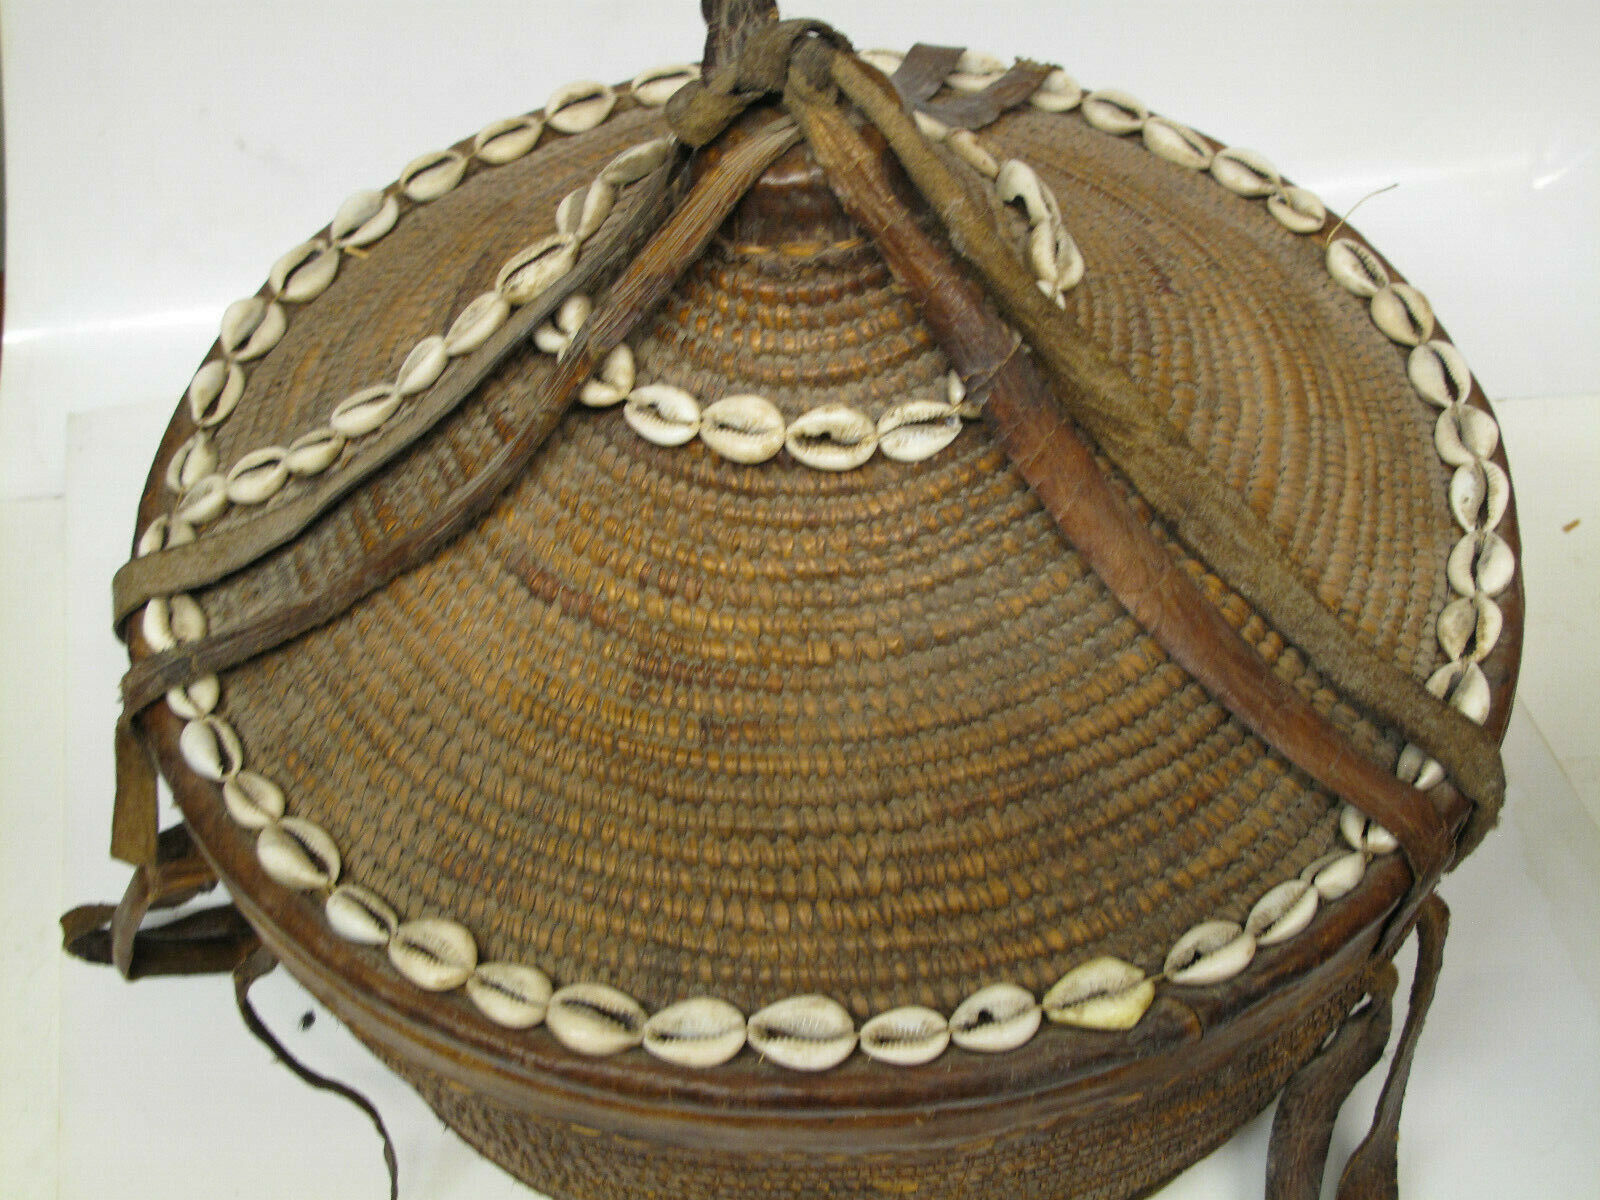 Large Antique Ethiopian Harari Woven Grass Basket Leather Trim Cowrie Shell 28”